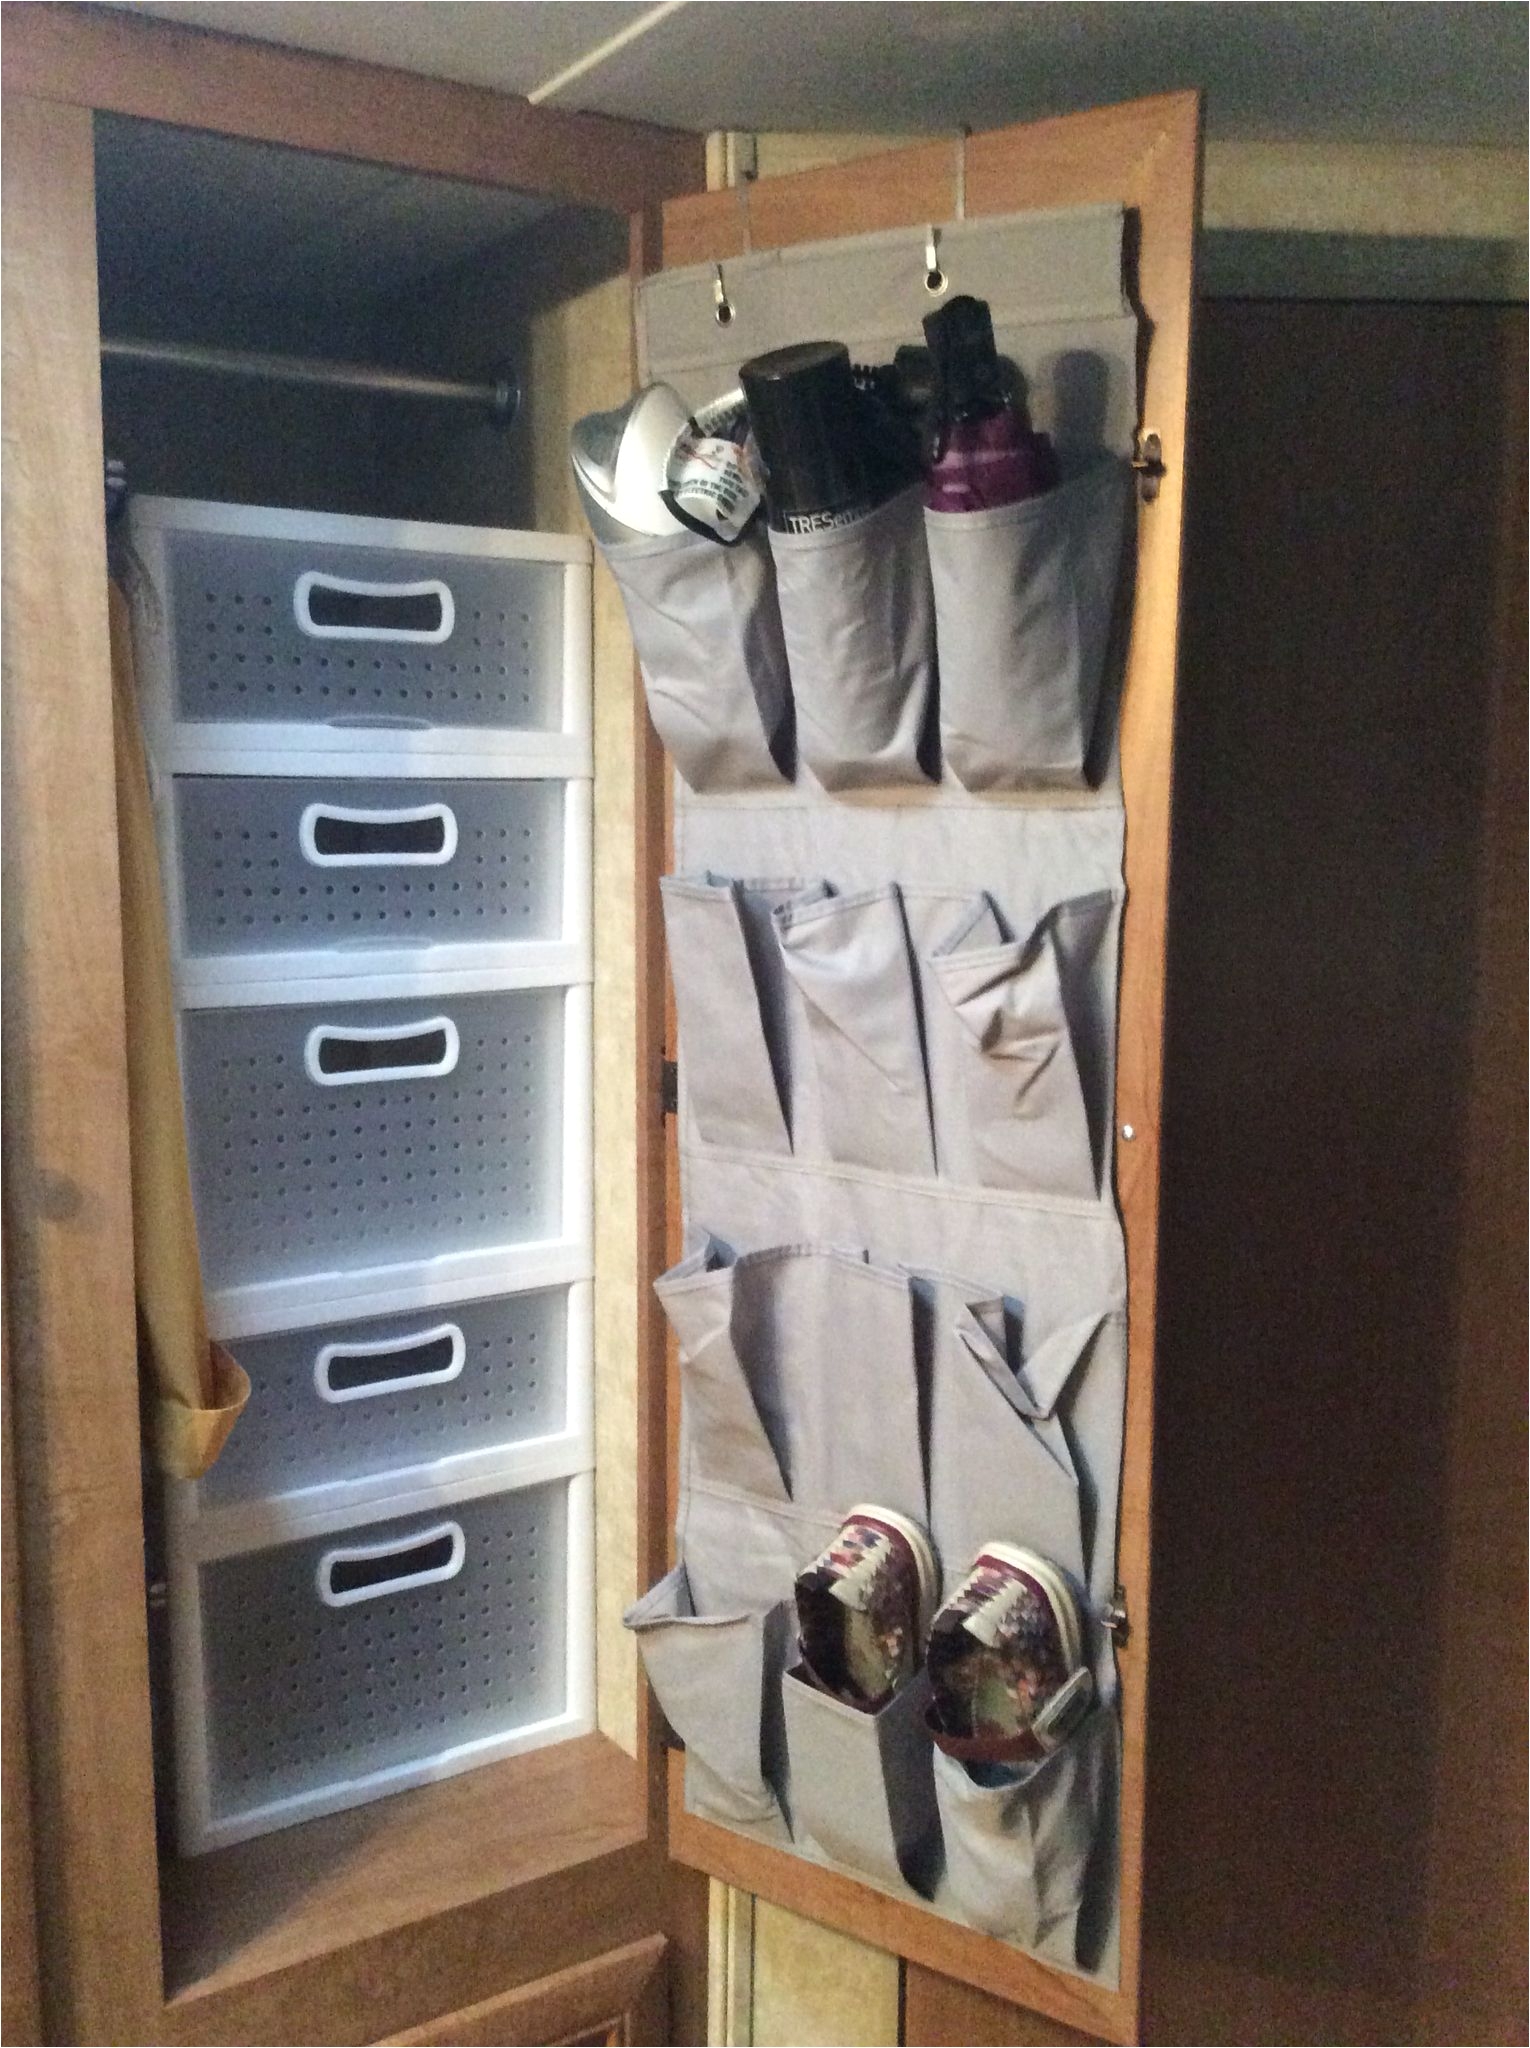 Wooden Shoe Racks Target Storage solution the Kids Closet Has Been A Struggle In Our